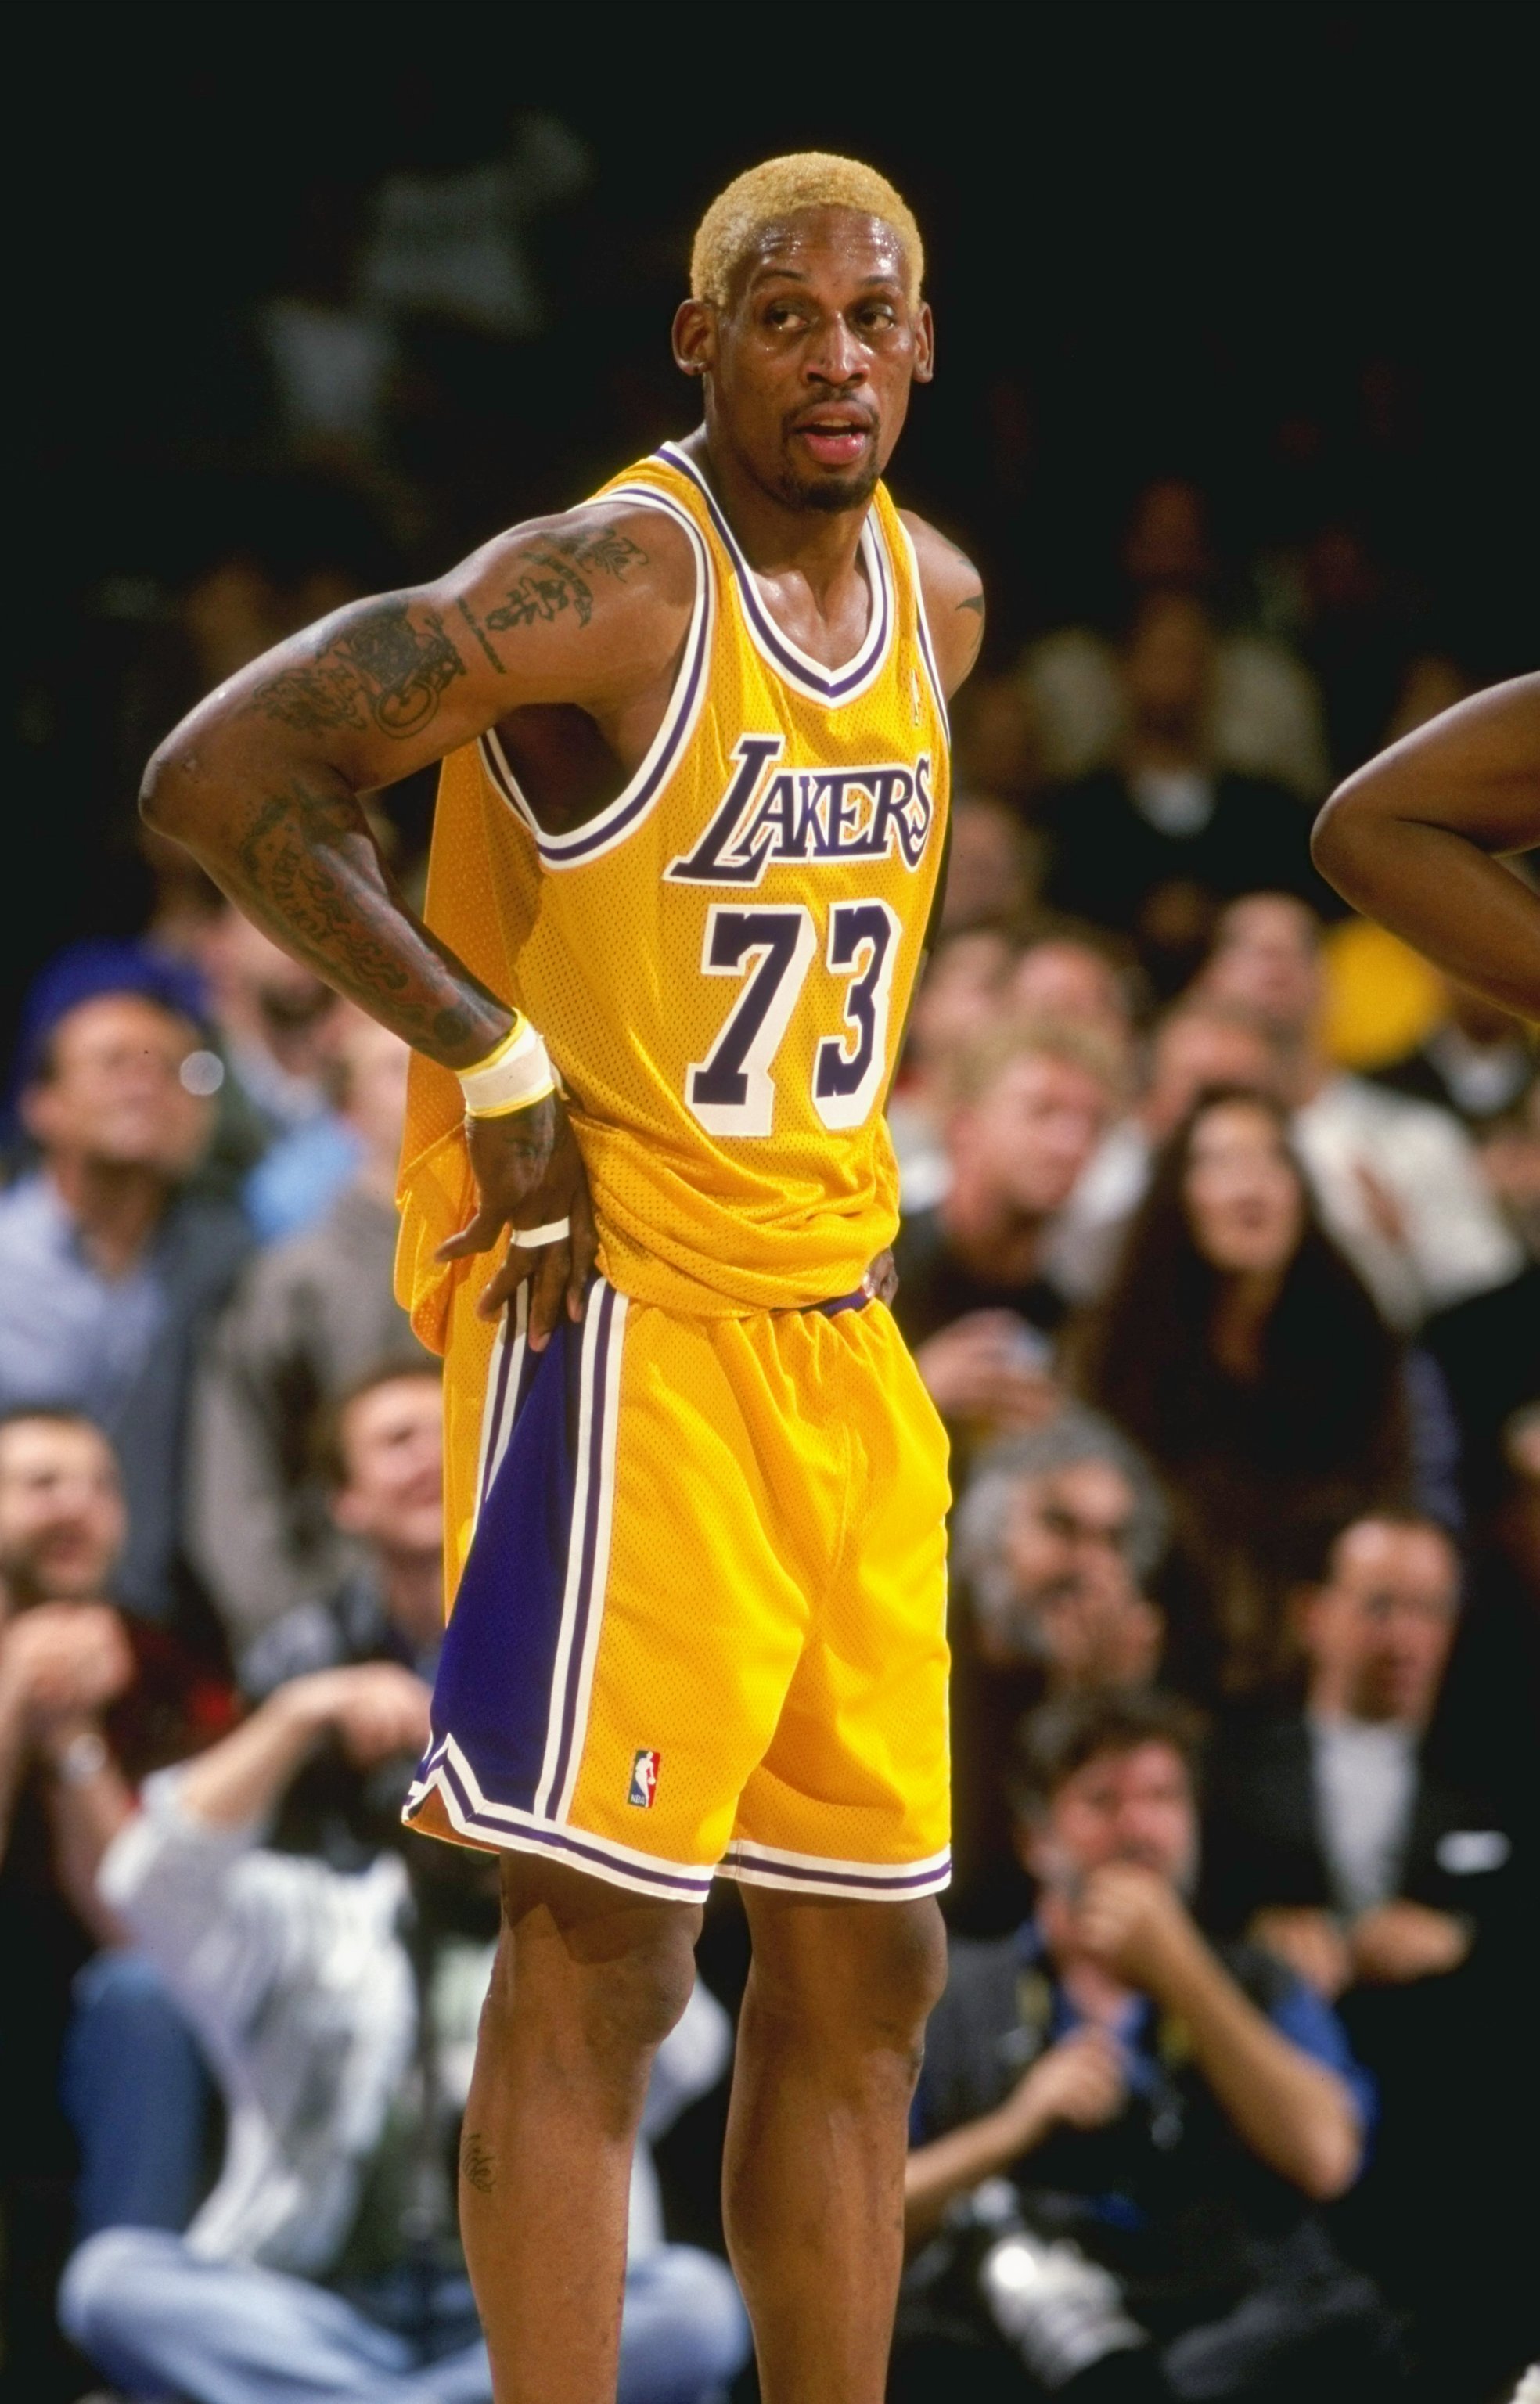 Top 10 Best Los Angeles Lakers Players of All Time